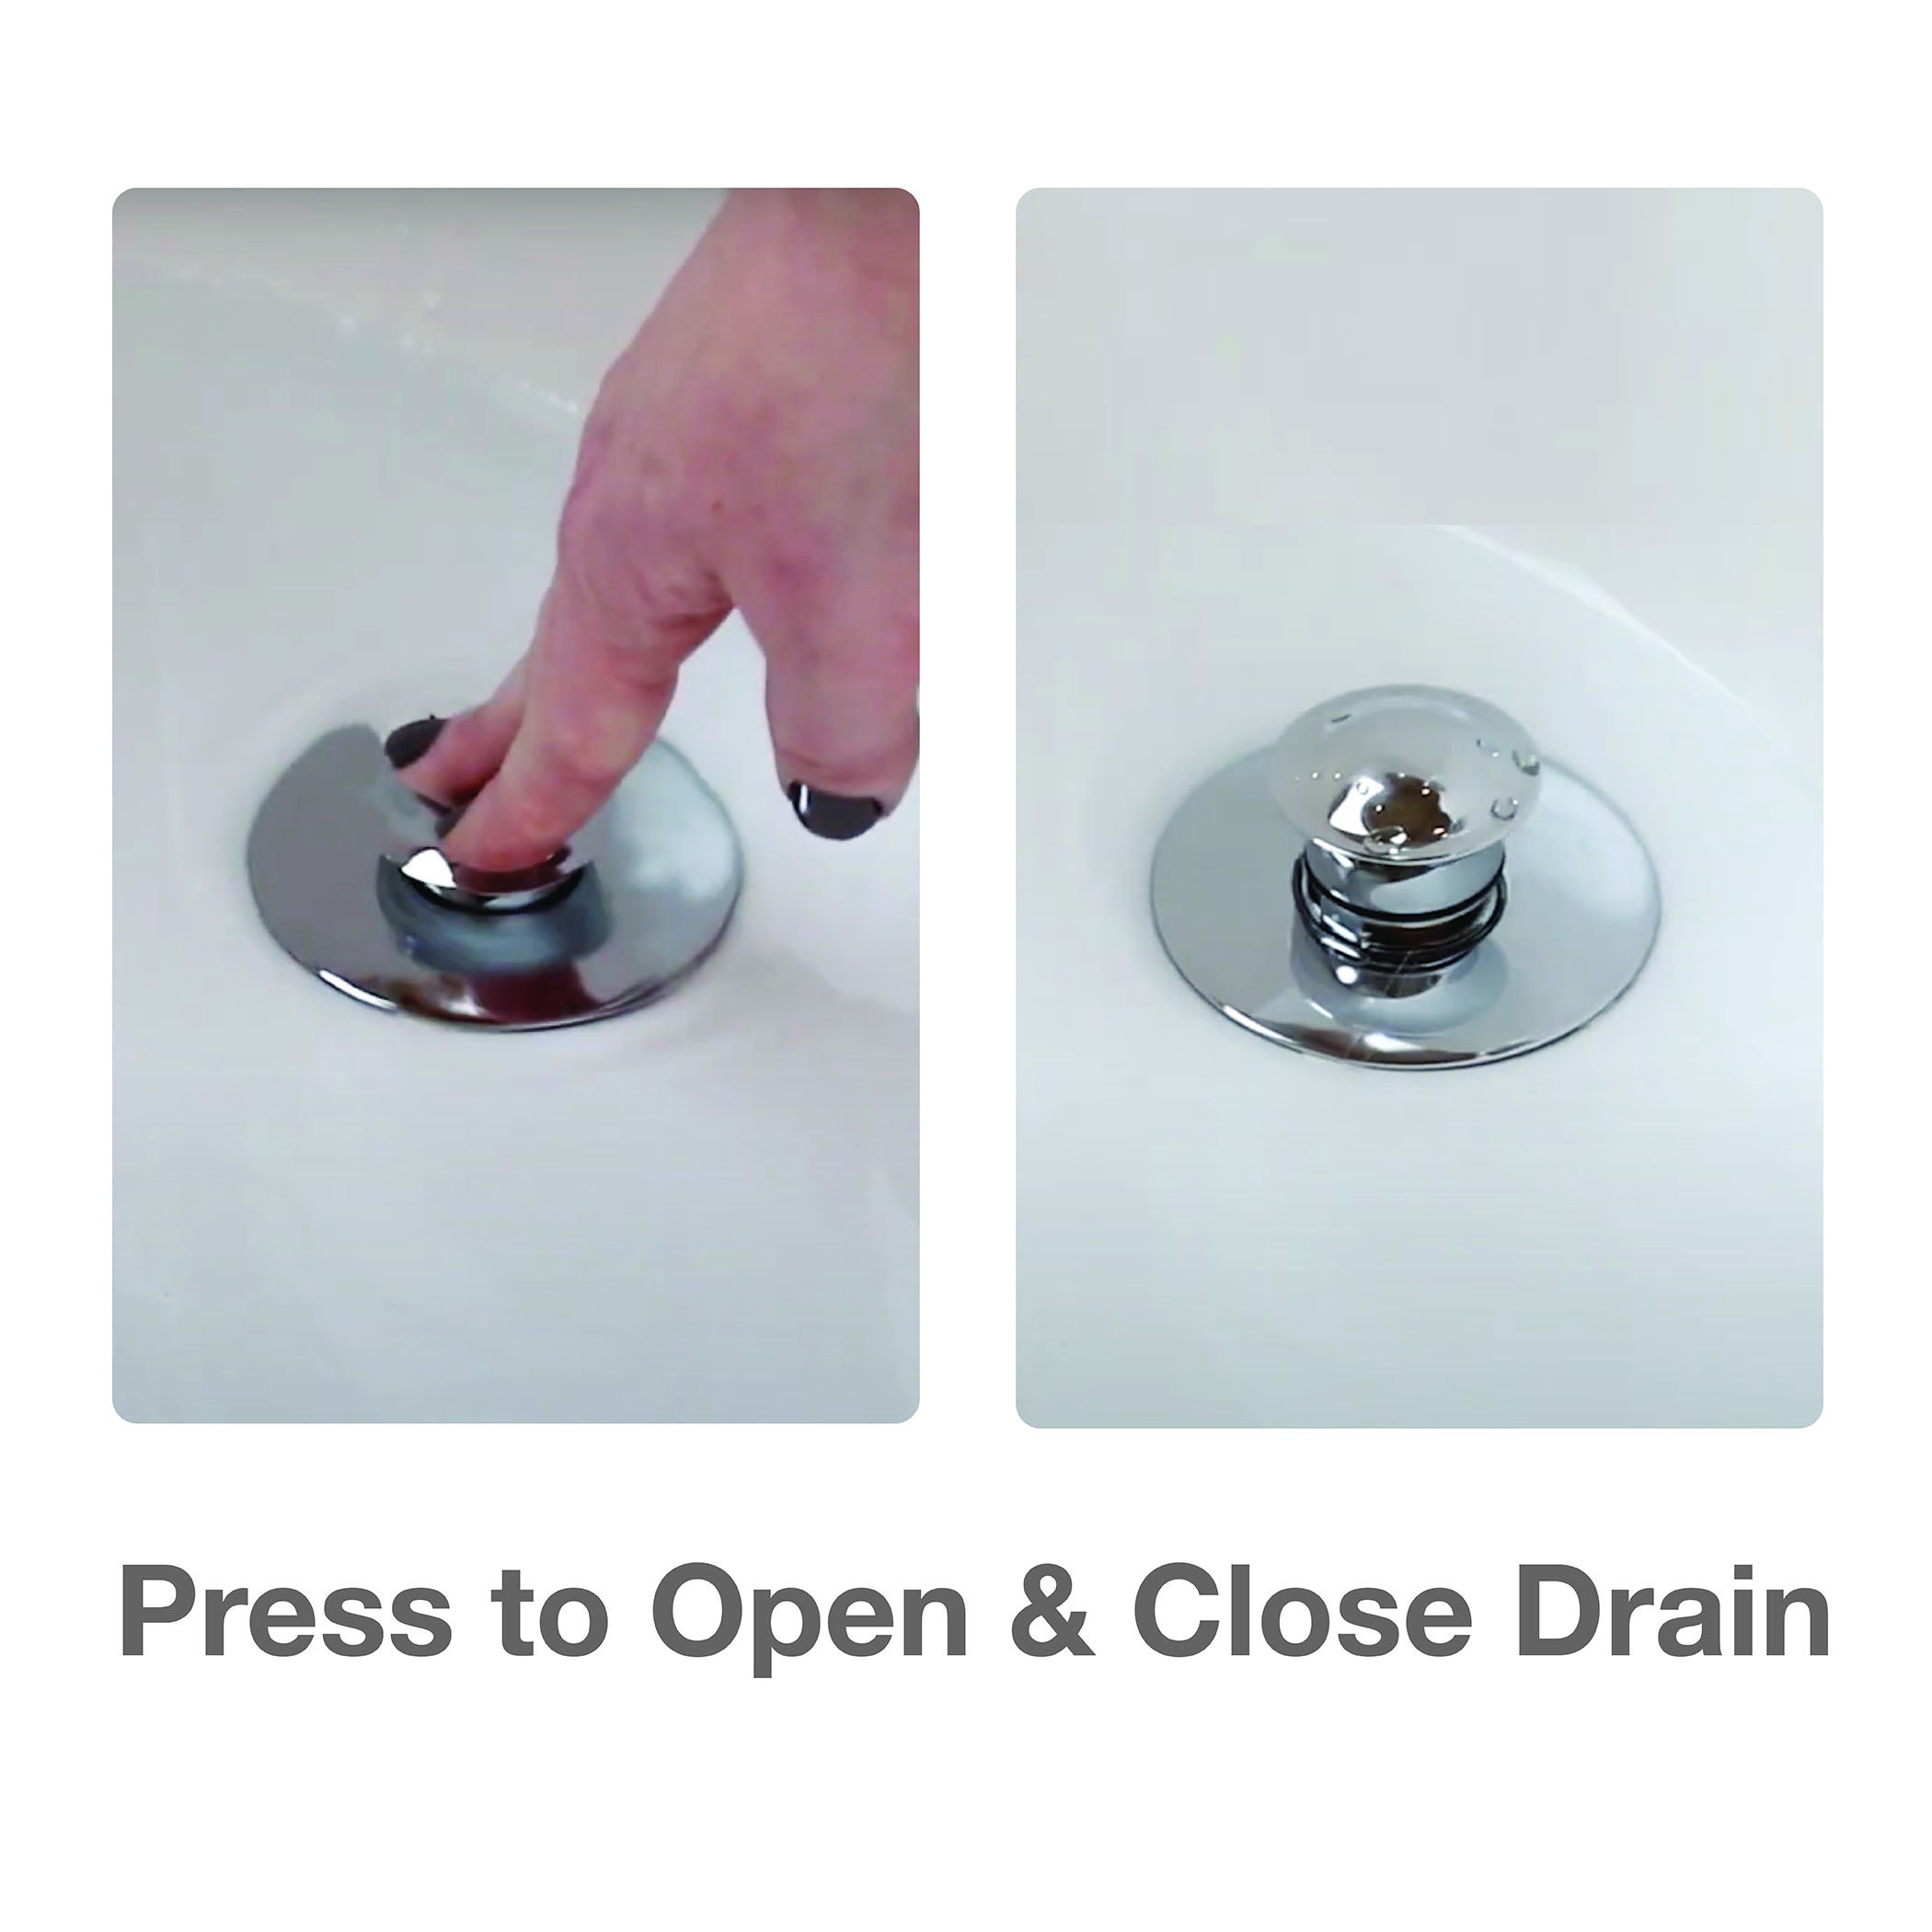 Danco Lift and Turn Drain Stopper In Chrome